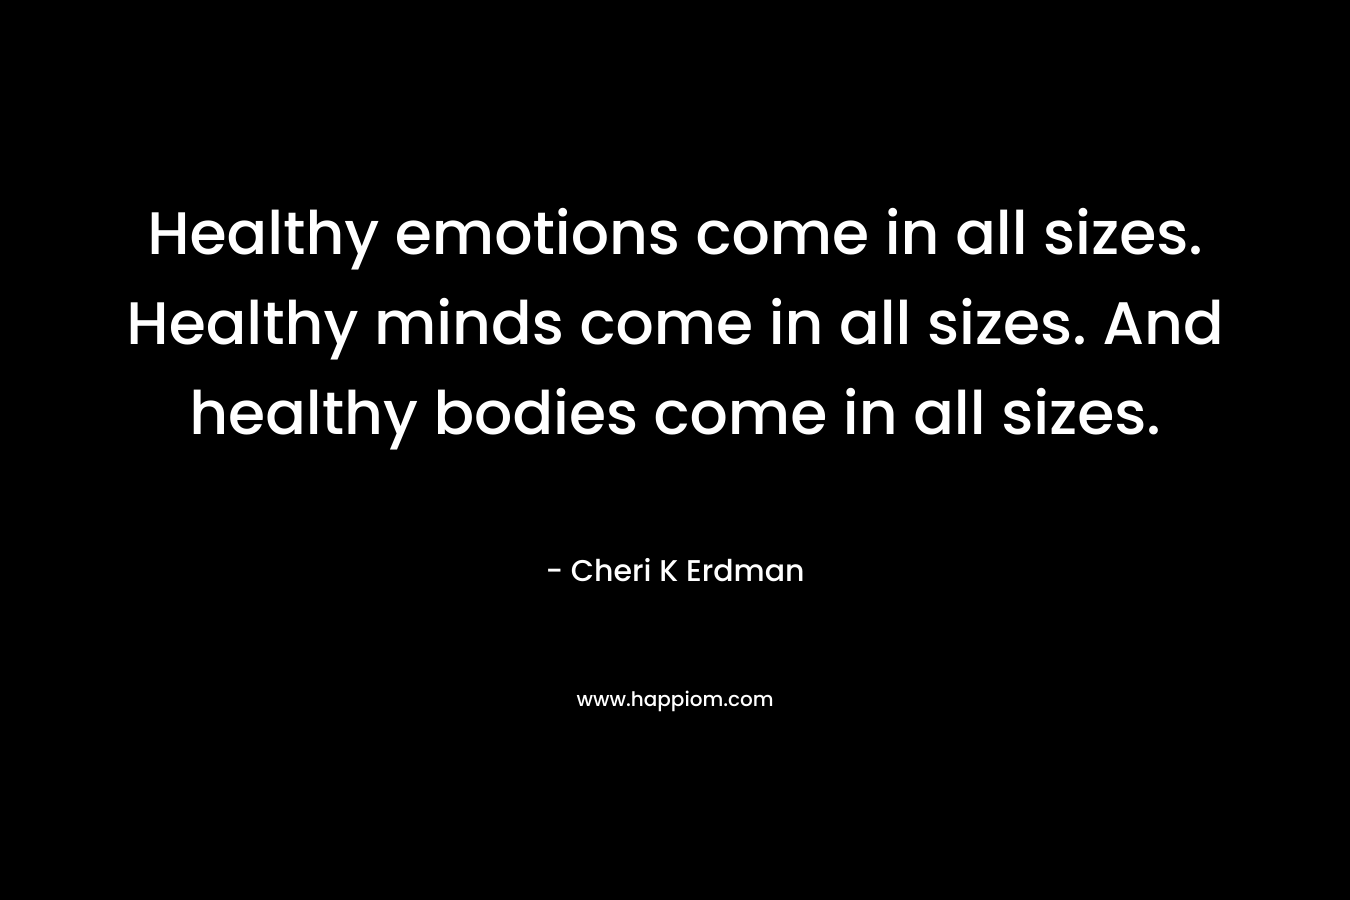 Healthy emotions come in all sizes. Healthy minds come in all sizes. And healthy bodies come in all sizes. – Cheri K Erdman